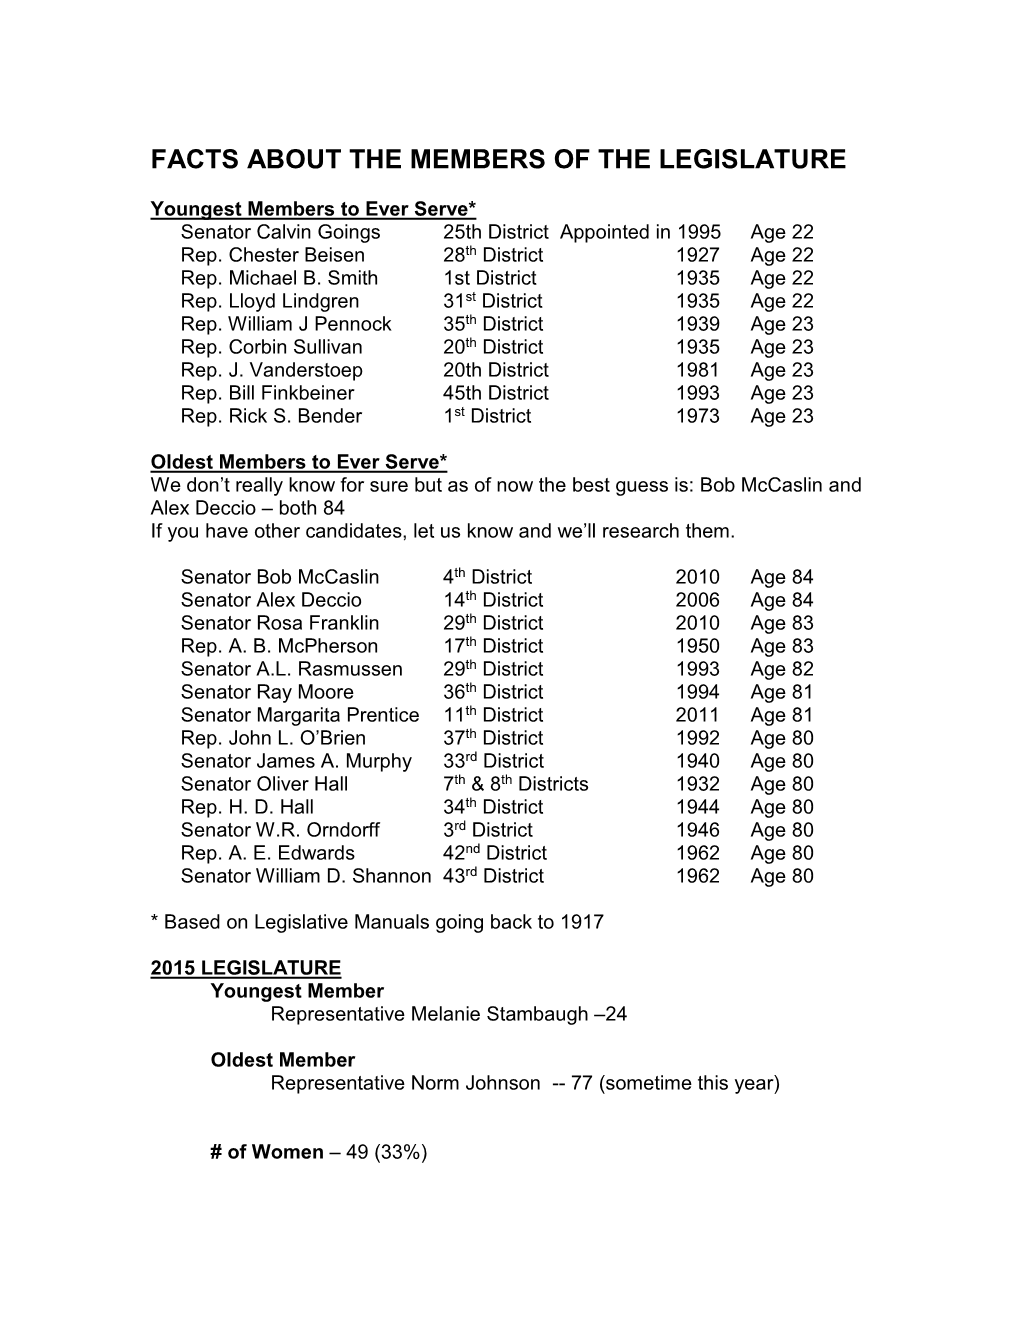 Facts About the Members of the Legislature